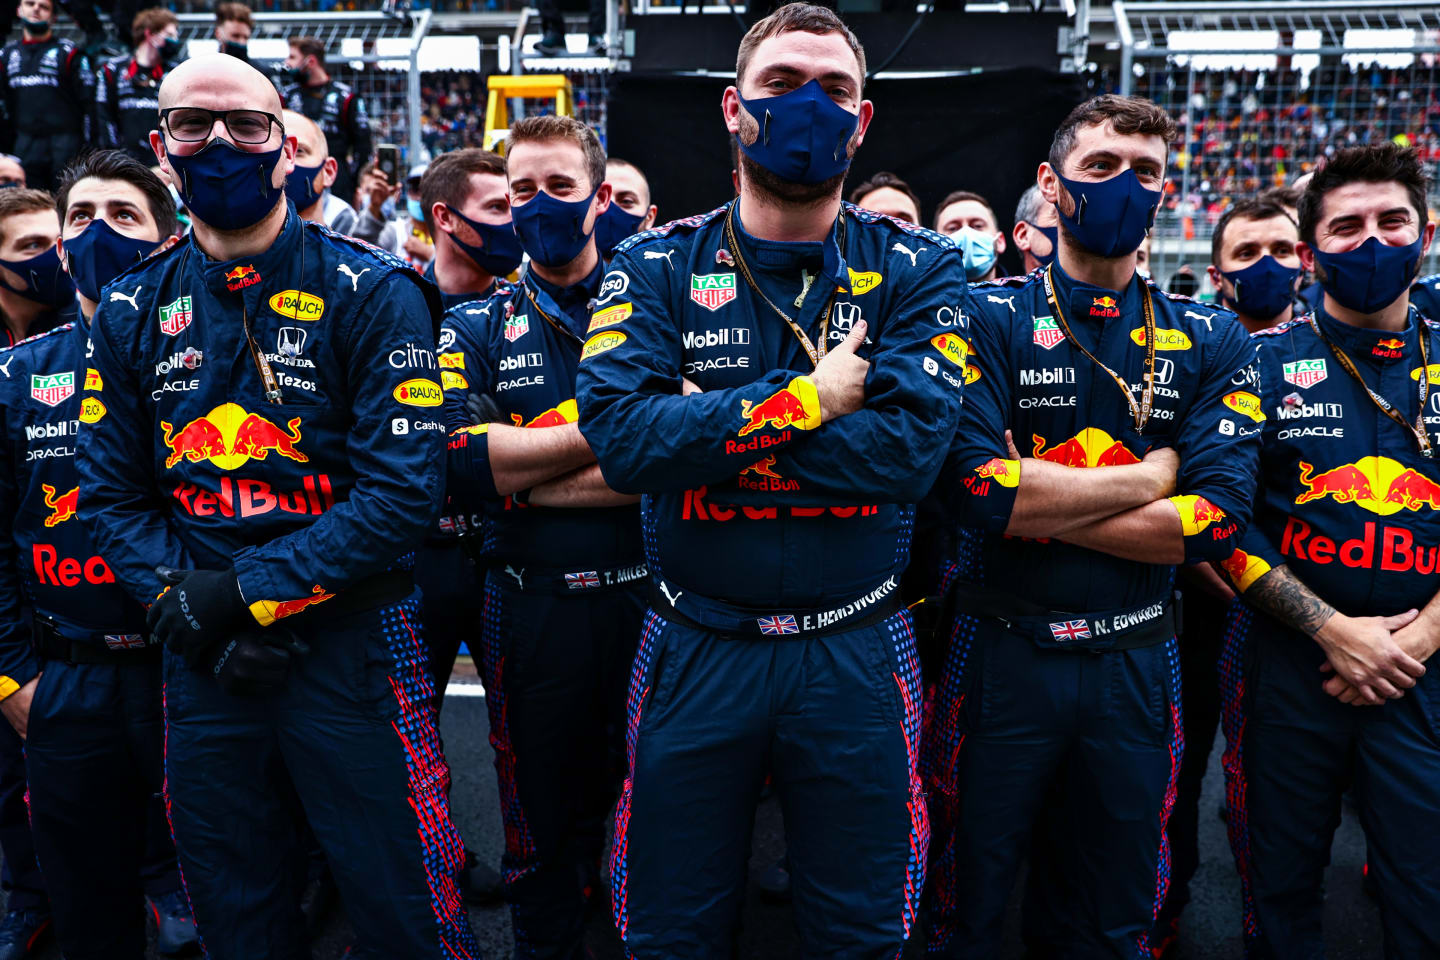 ISTANBUL, TURKEY - OCTOBER 10: The Red Bull Racing team enjoy the atmosphere at the podium